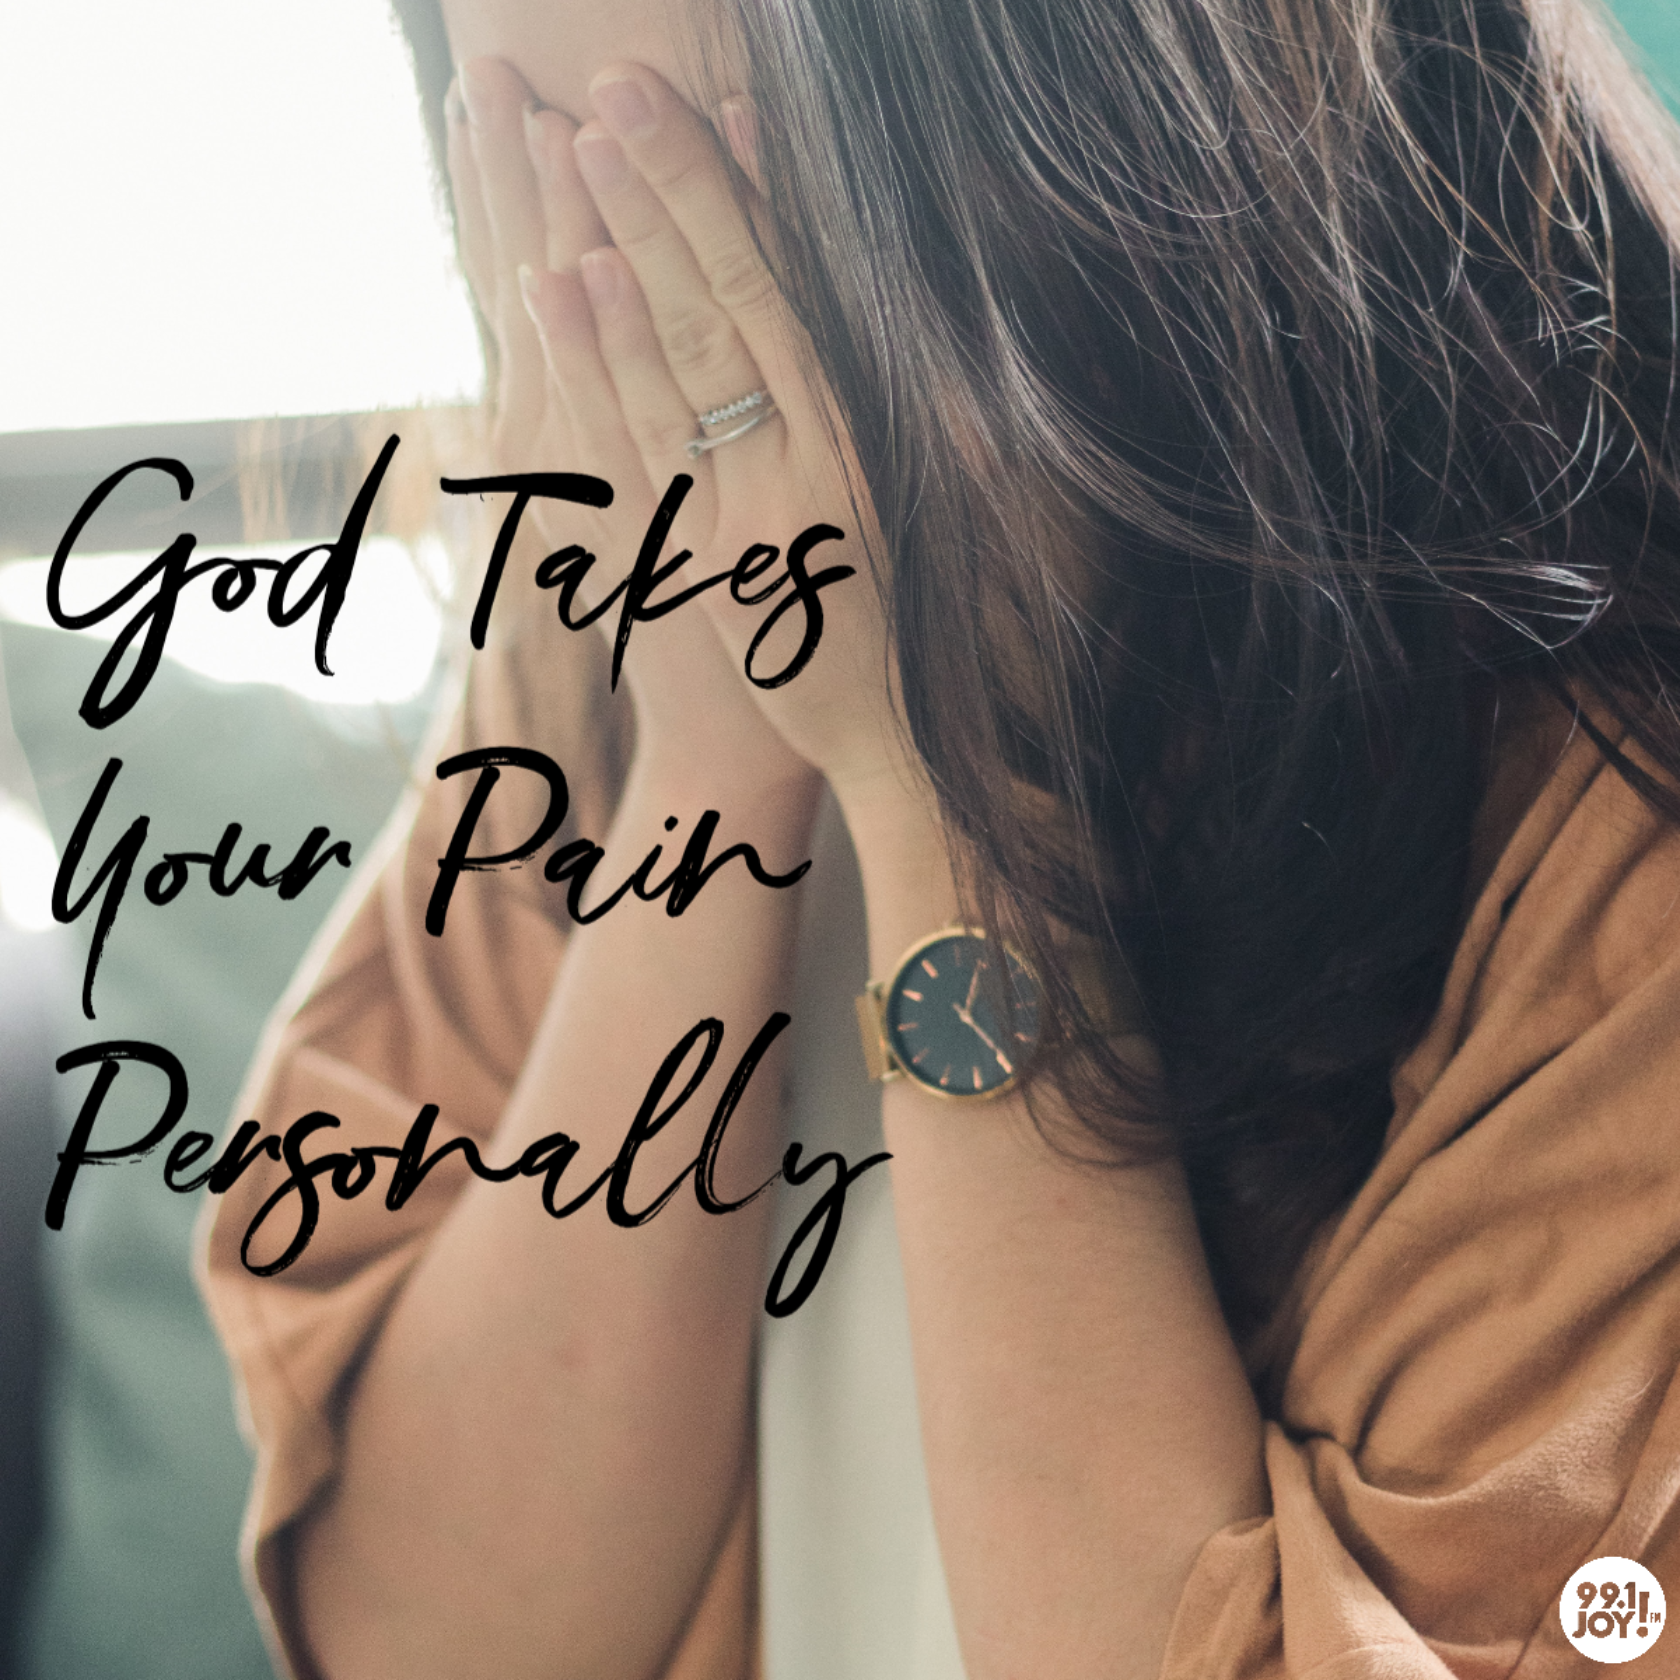 God Takes Your Pain Personally